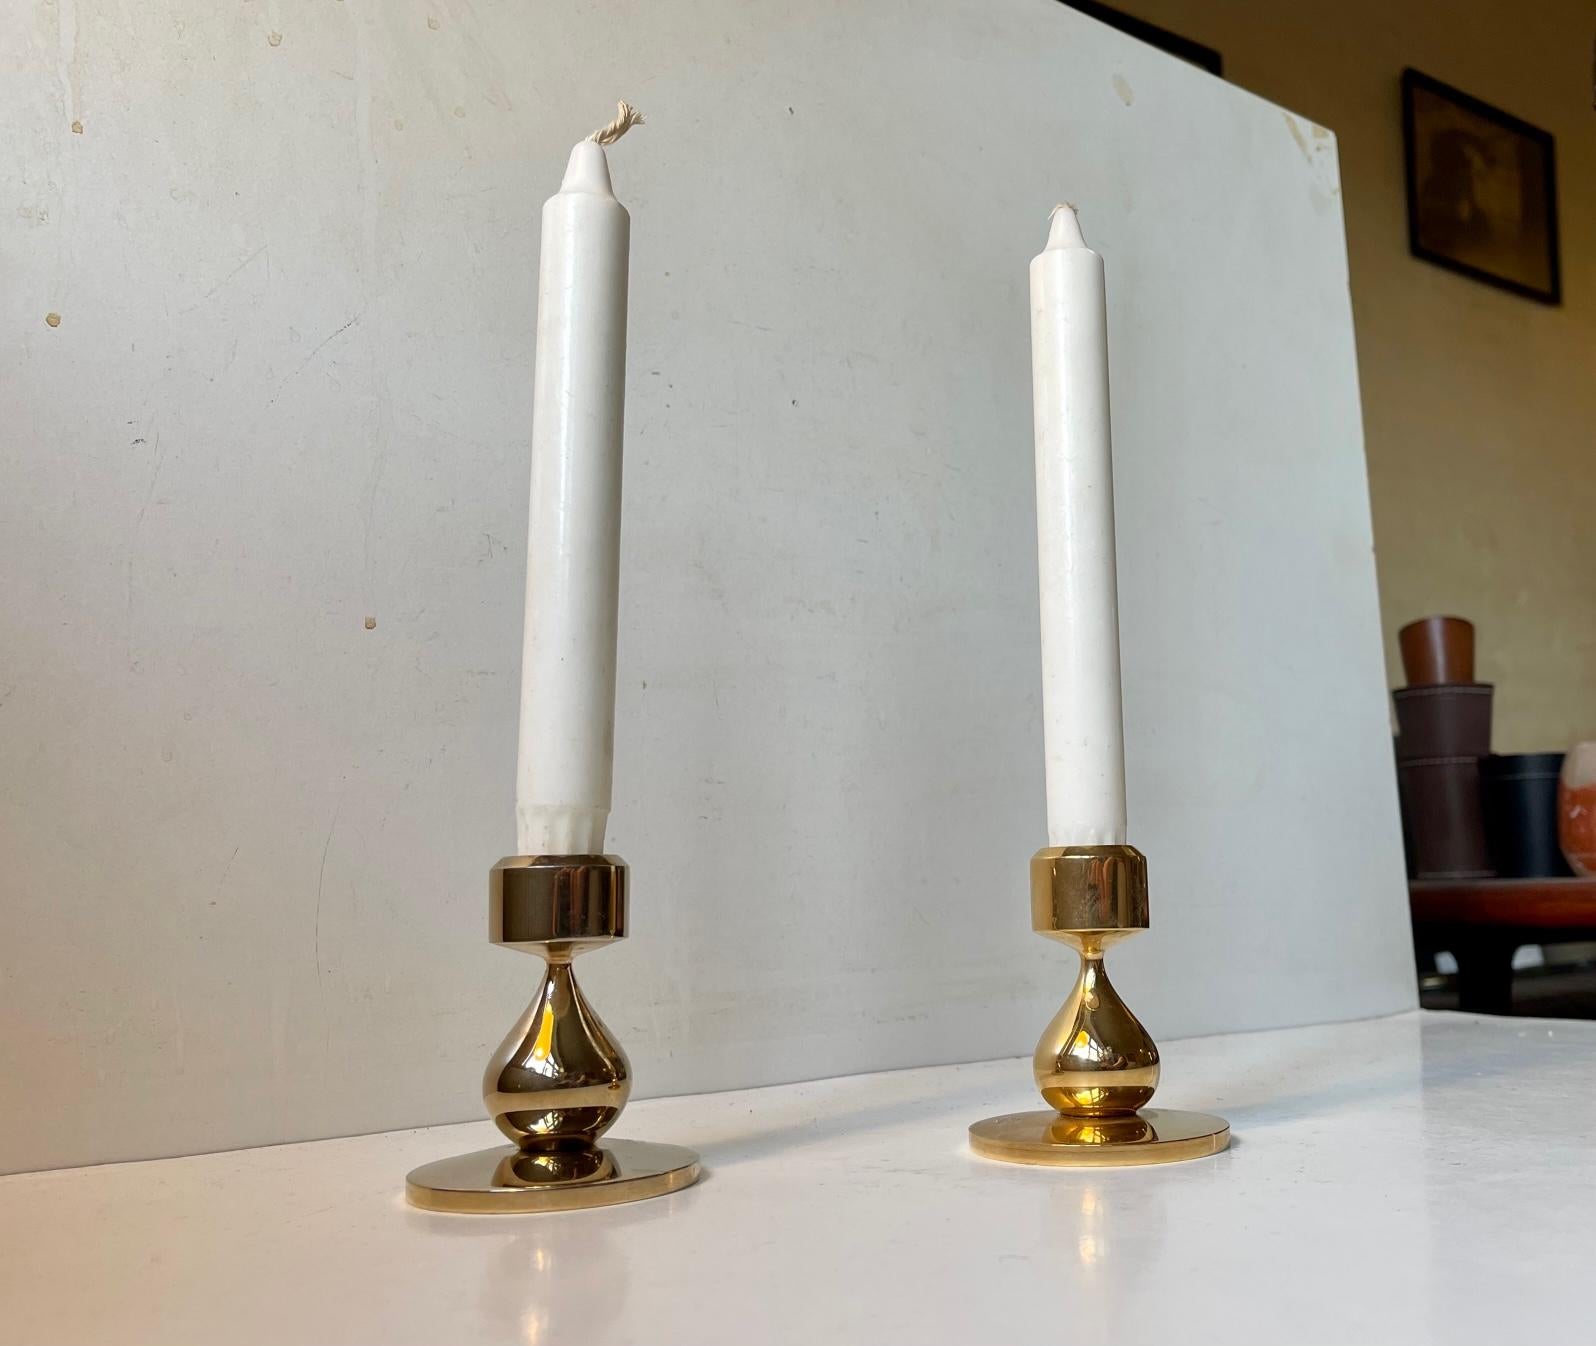 A pair of organically teardrop shaped 24-carat gold-plated candleholders designed by Hugo Asmussen. Manufactured by Asmussen in Denmark circa 1970. They are suited for regular sized candles. Measures: Height: 8 cm, Diameter: 7 cm (base).